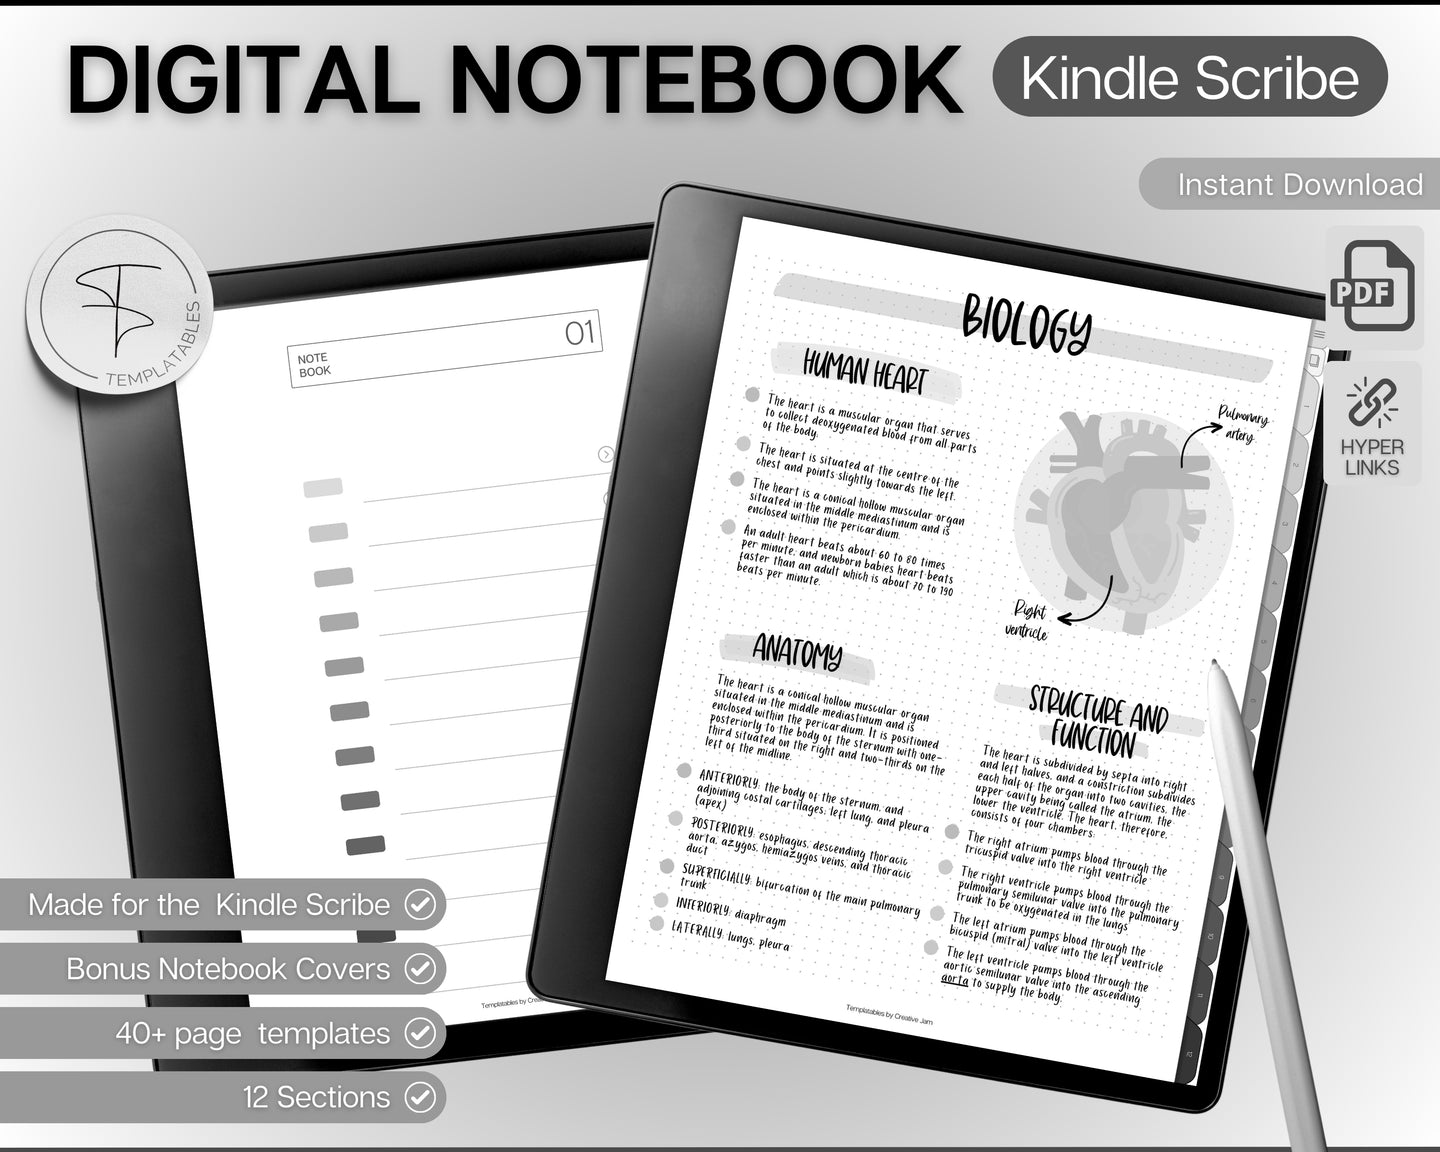 Kindle Scribe Digital Notebook | With over 40+ Page Templates for your Kindle Scribe | Hyperlinked Note Taking Templates including Cornell, Lined, Dotted, Grid & Bonus Covers